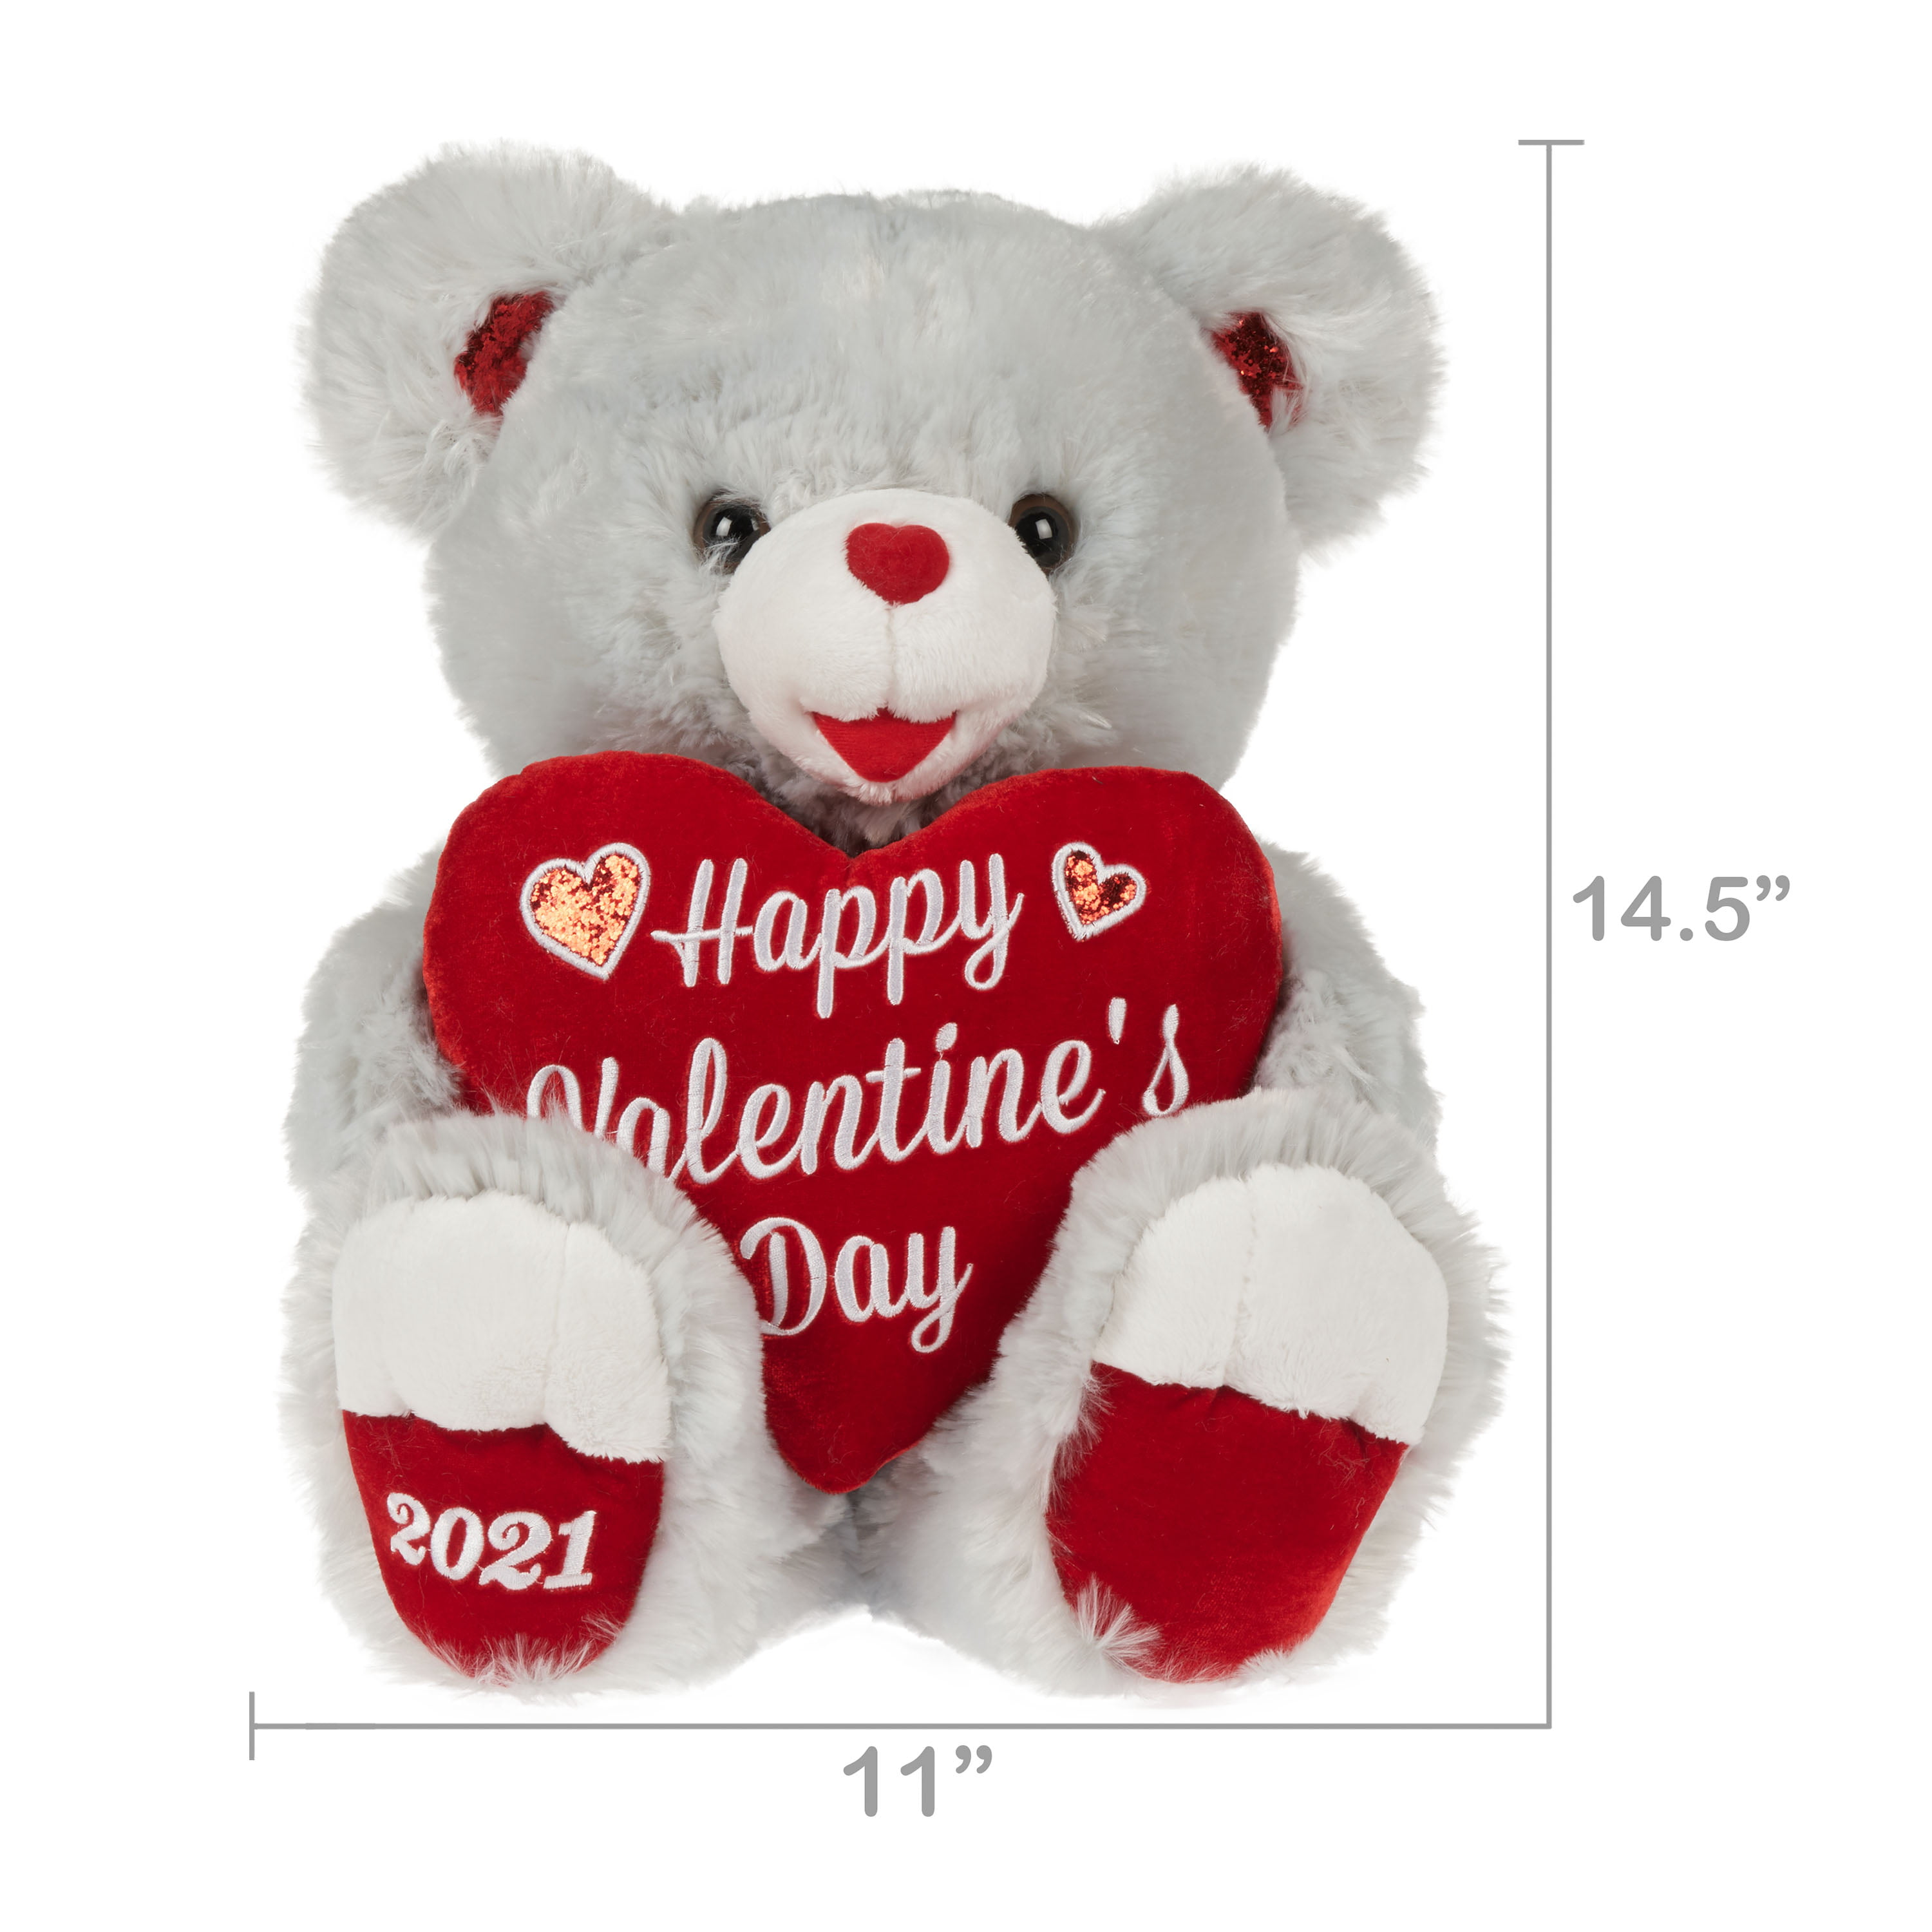 Details about   New HTF Build A Bear Valentine's Day Plush Heart Sold Out BAB 